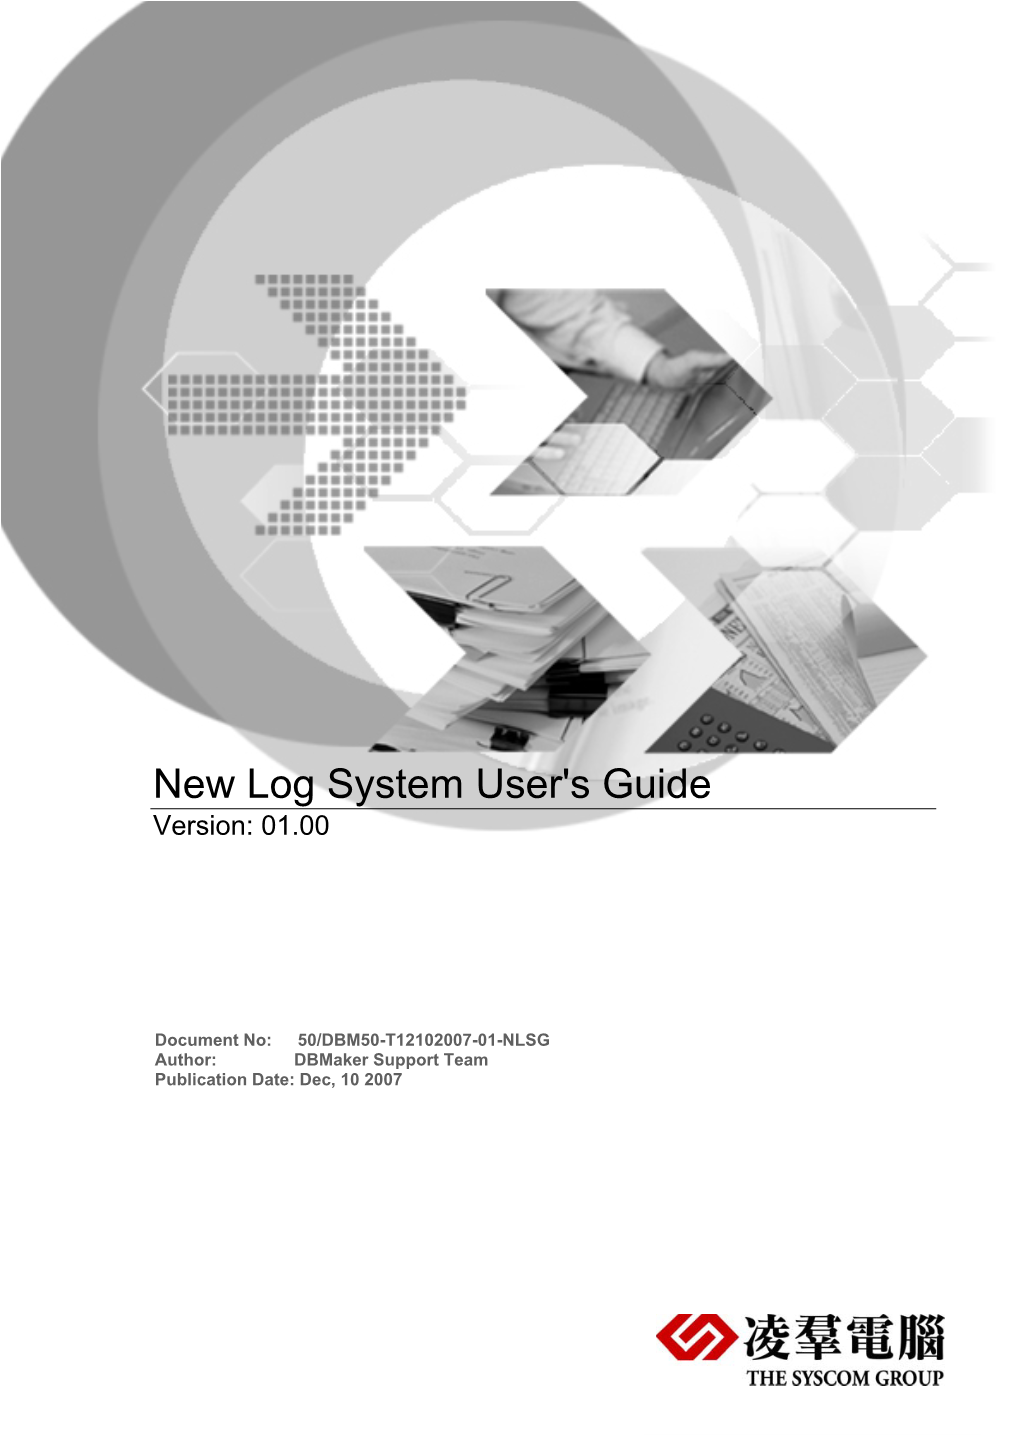 New Log System User's Guide Version: 01.00